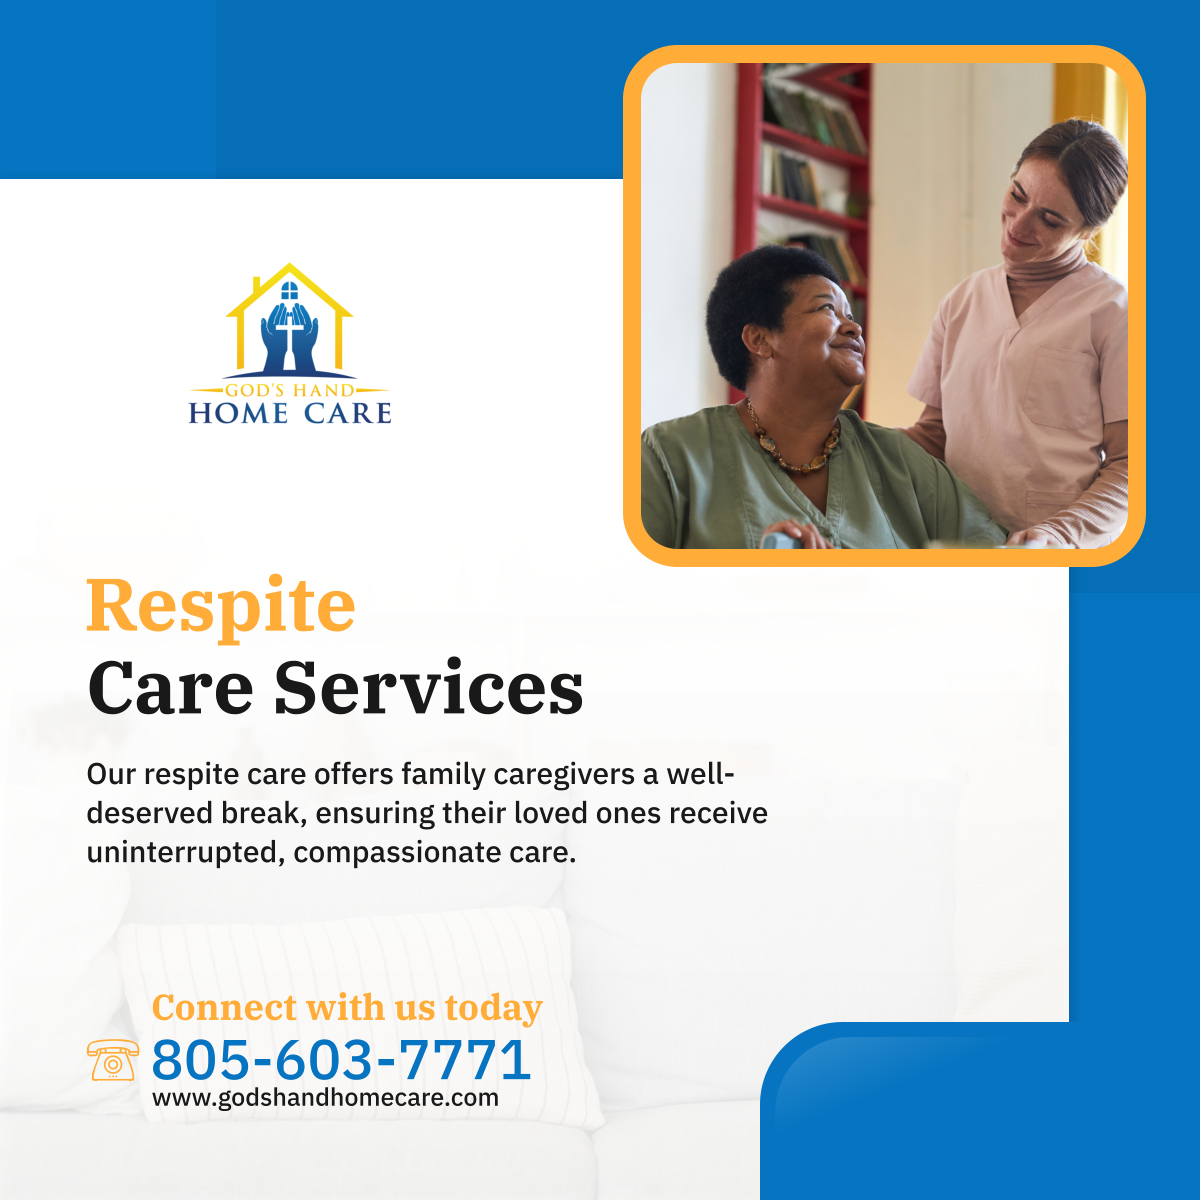 Everyone needs a break. Allow our respite care services to give you the rest you deserve while we care for your loved ones. 

#OxnardCA #HomeCare #CaregiverSupport